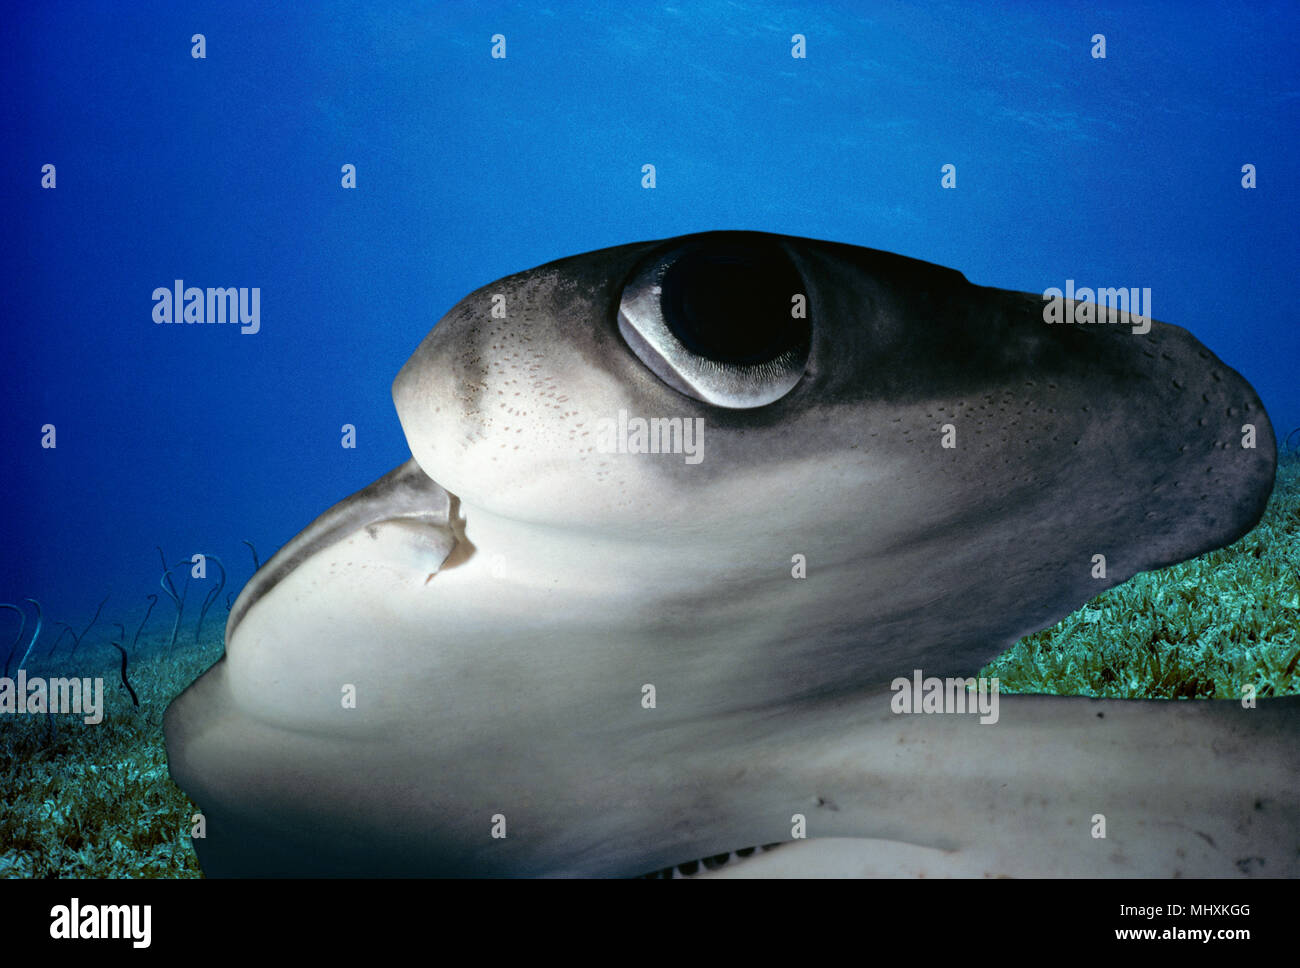 Scalloped Hammerhead Shark (Sphyrna lewini) at night, Cocos Island, Costa Rica - Pacific Ocean.  Image digitally altered to remove distracting or to a Stock Photo